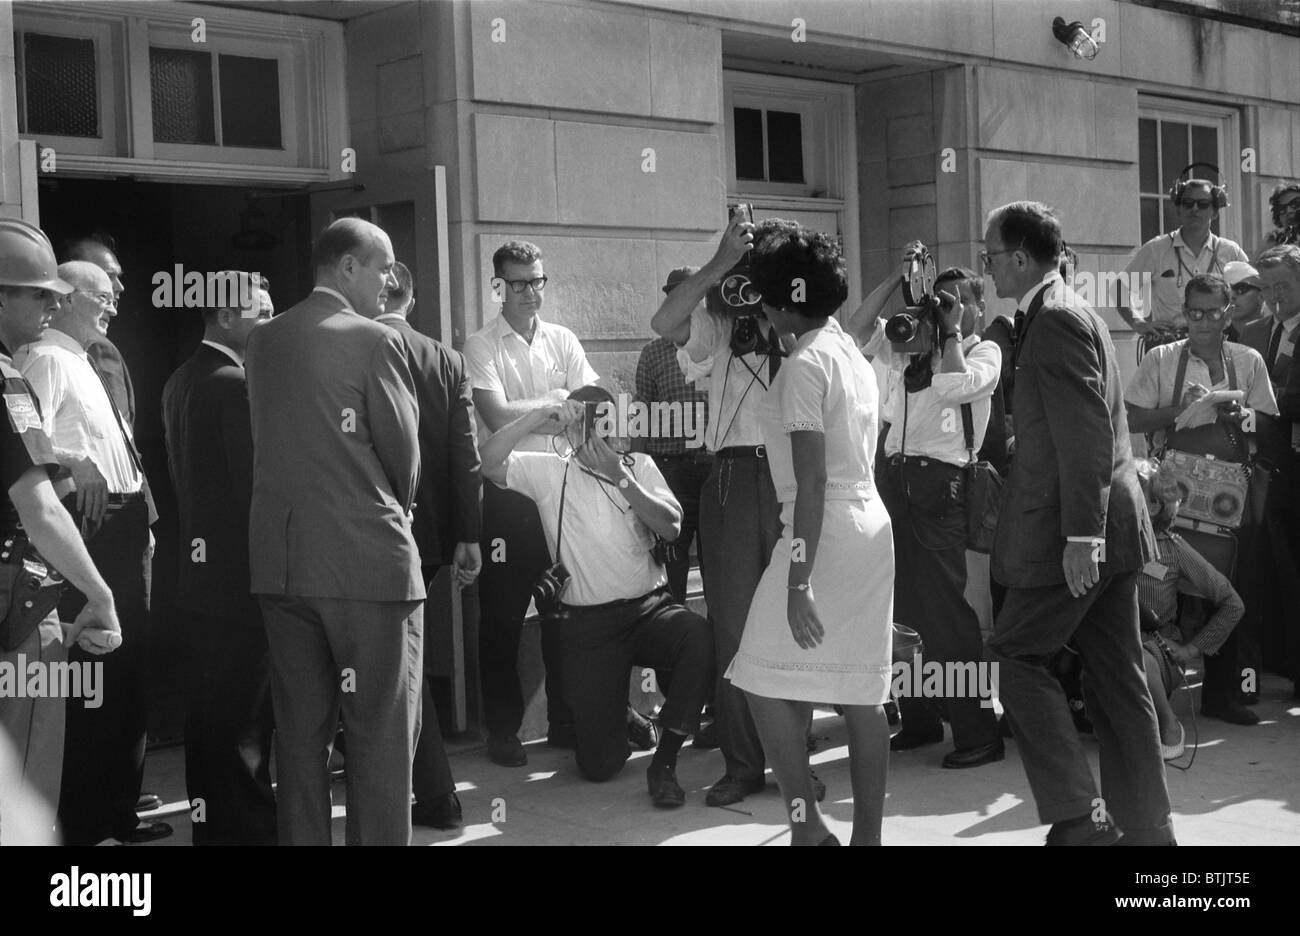 Civil rights, Vivian Malone (front, right of center) entering Foster Auditorium to register for classes at the University of Alabama. The crowd includes photographers, National Guard members and Deputy U.S. Attorney General Nicholas Katzenbach (front, left of center), photograph by Warren K. Leffler, June 11, 1963. Stock Photo